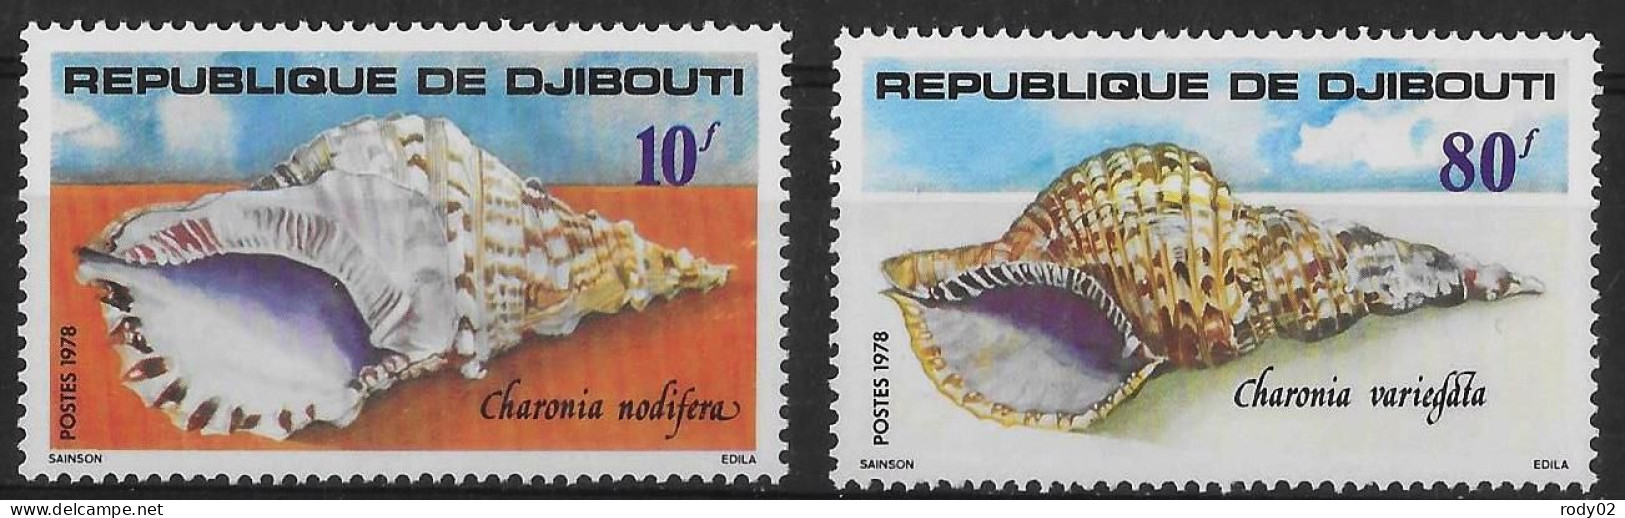 DJIBOUTI - COQUILLAGES - N° 486 ET 487 - NEUF** MNH - Conchas